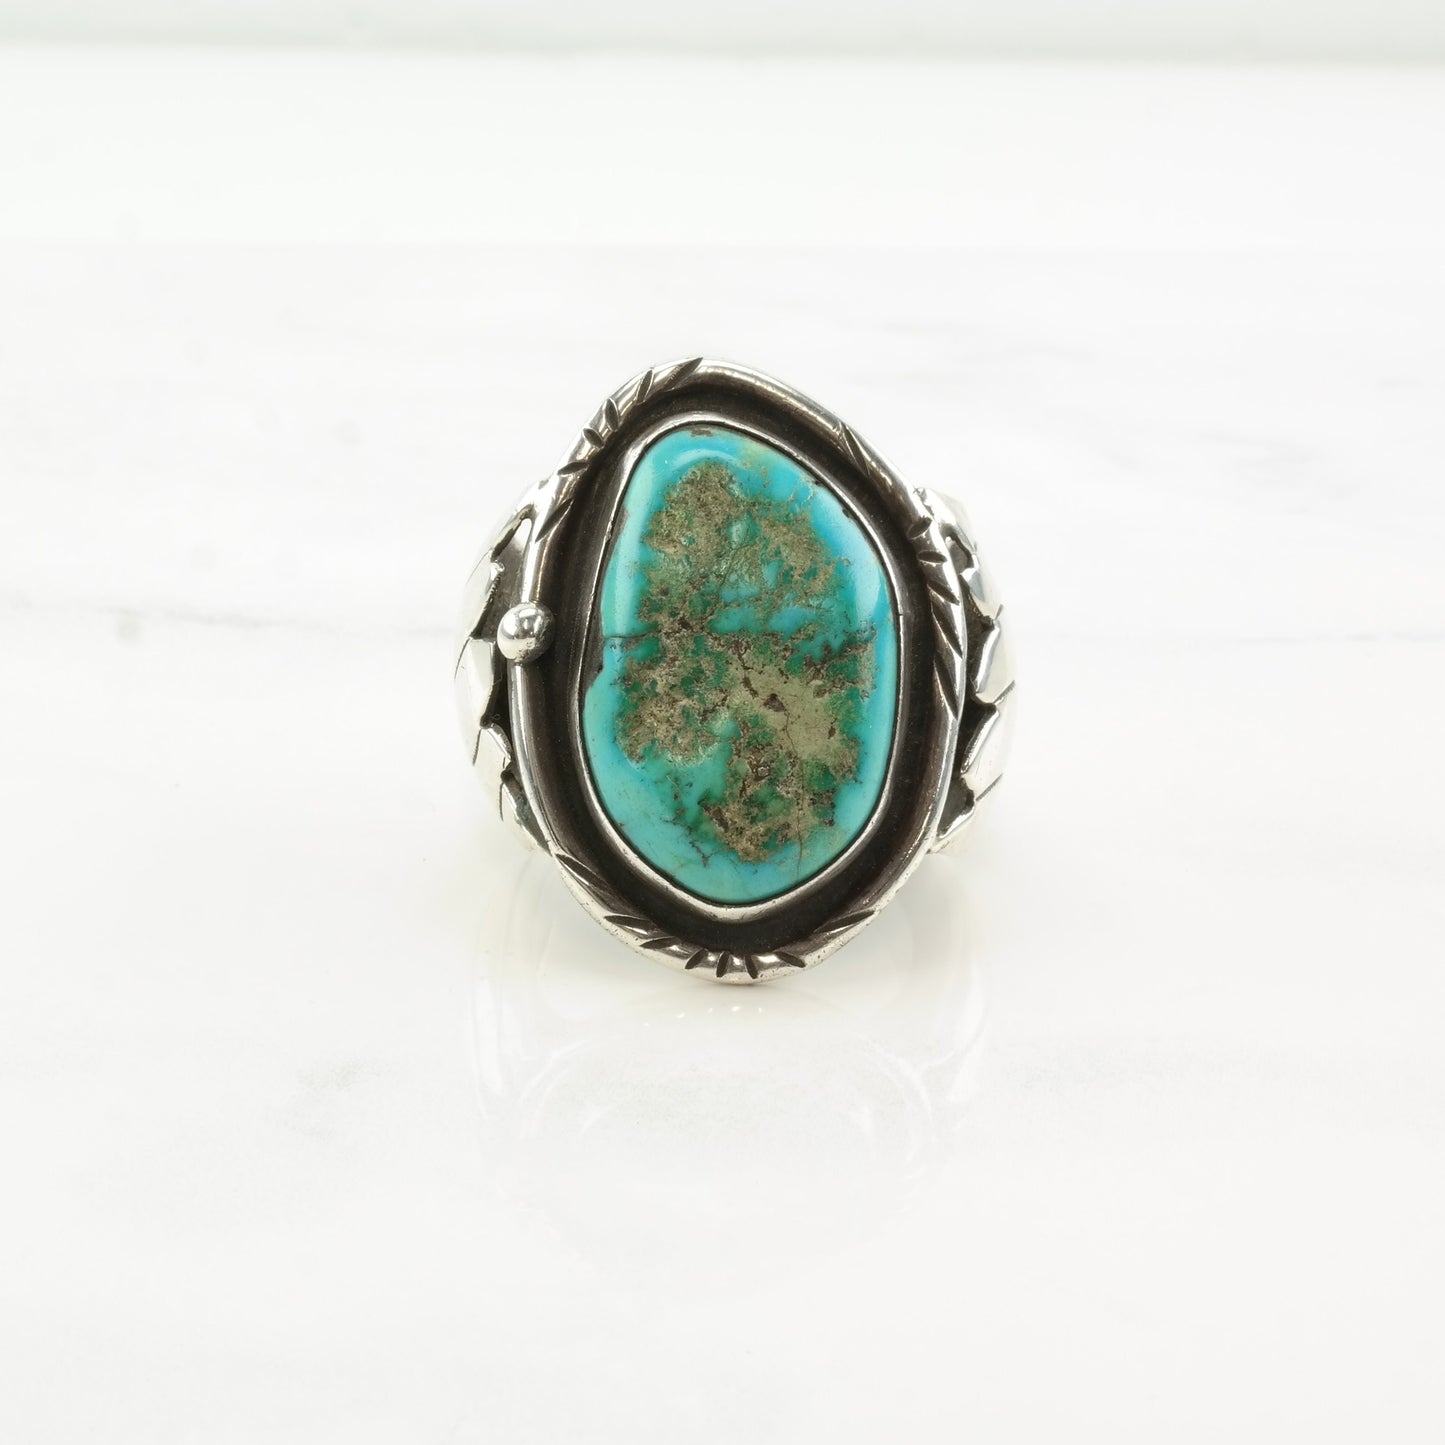 Vintage Southwest Silver Ring Turquoise Feather Shadowbox Sterling Size 12 1/2